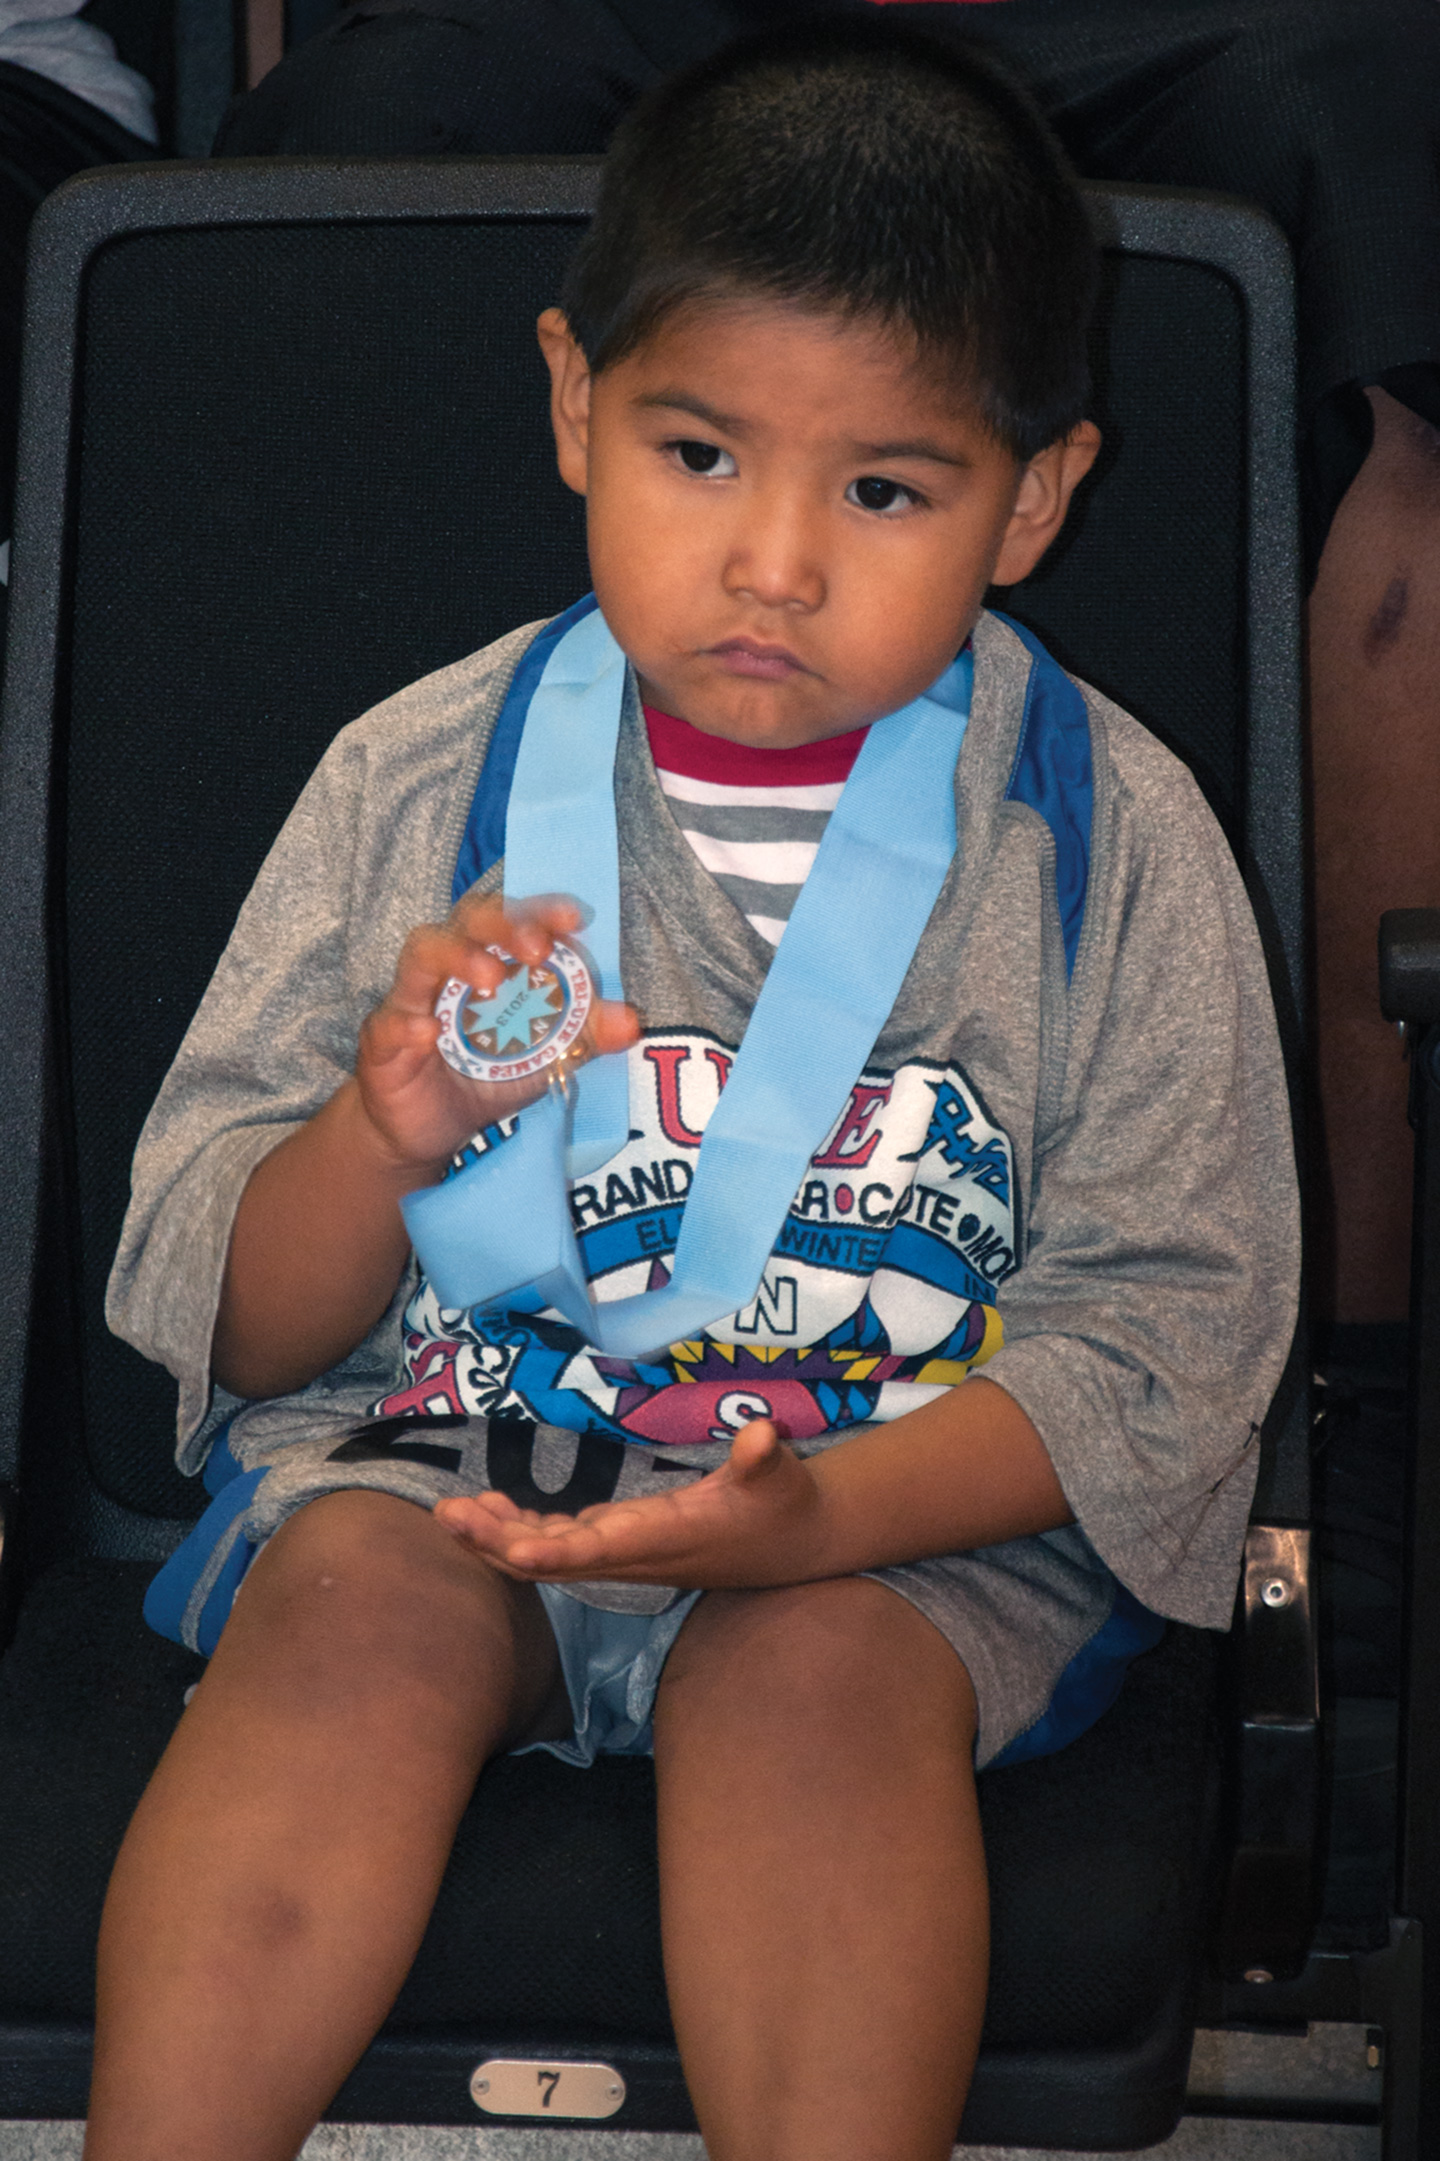 A young Southern Ute participant plays with his medal.